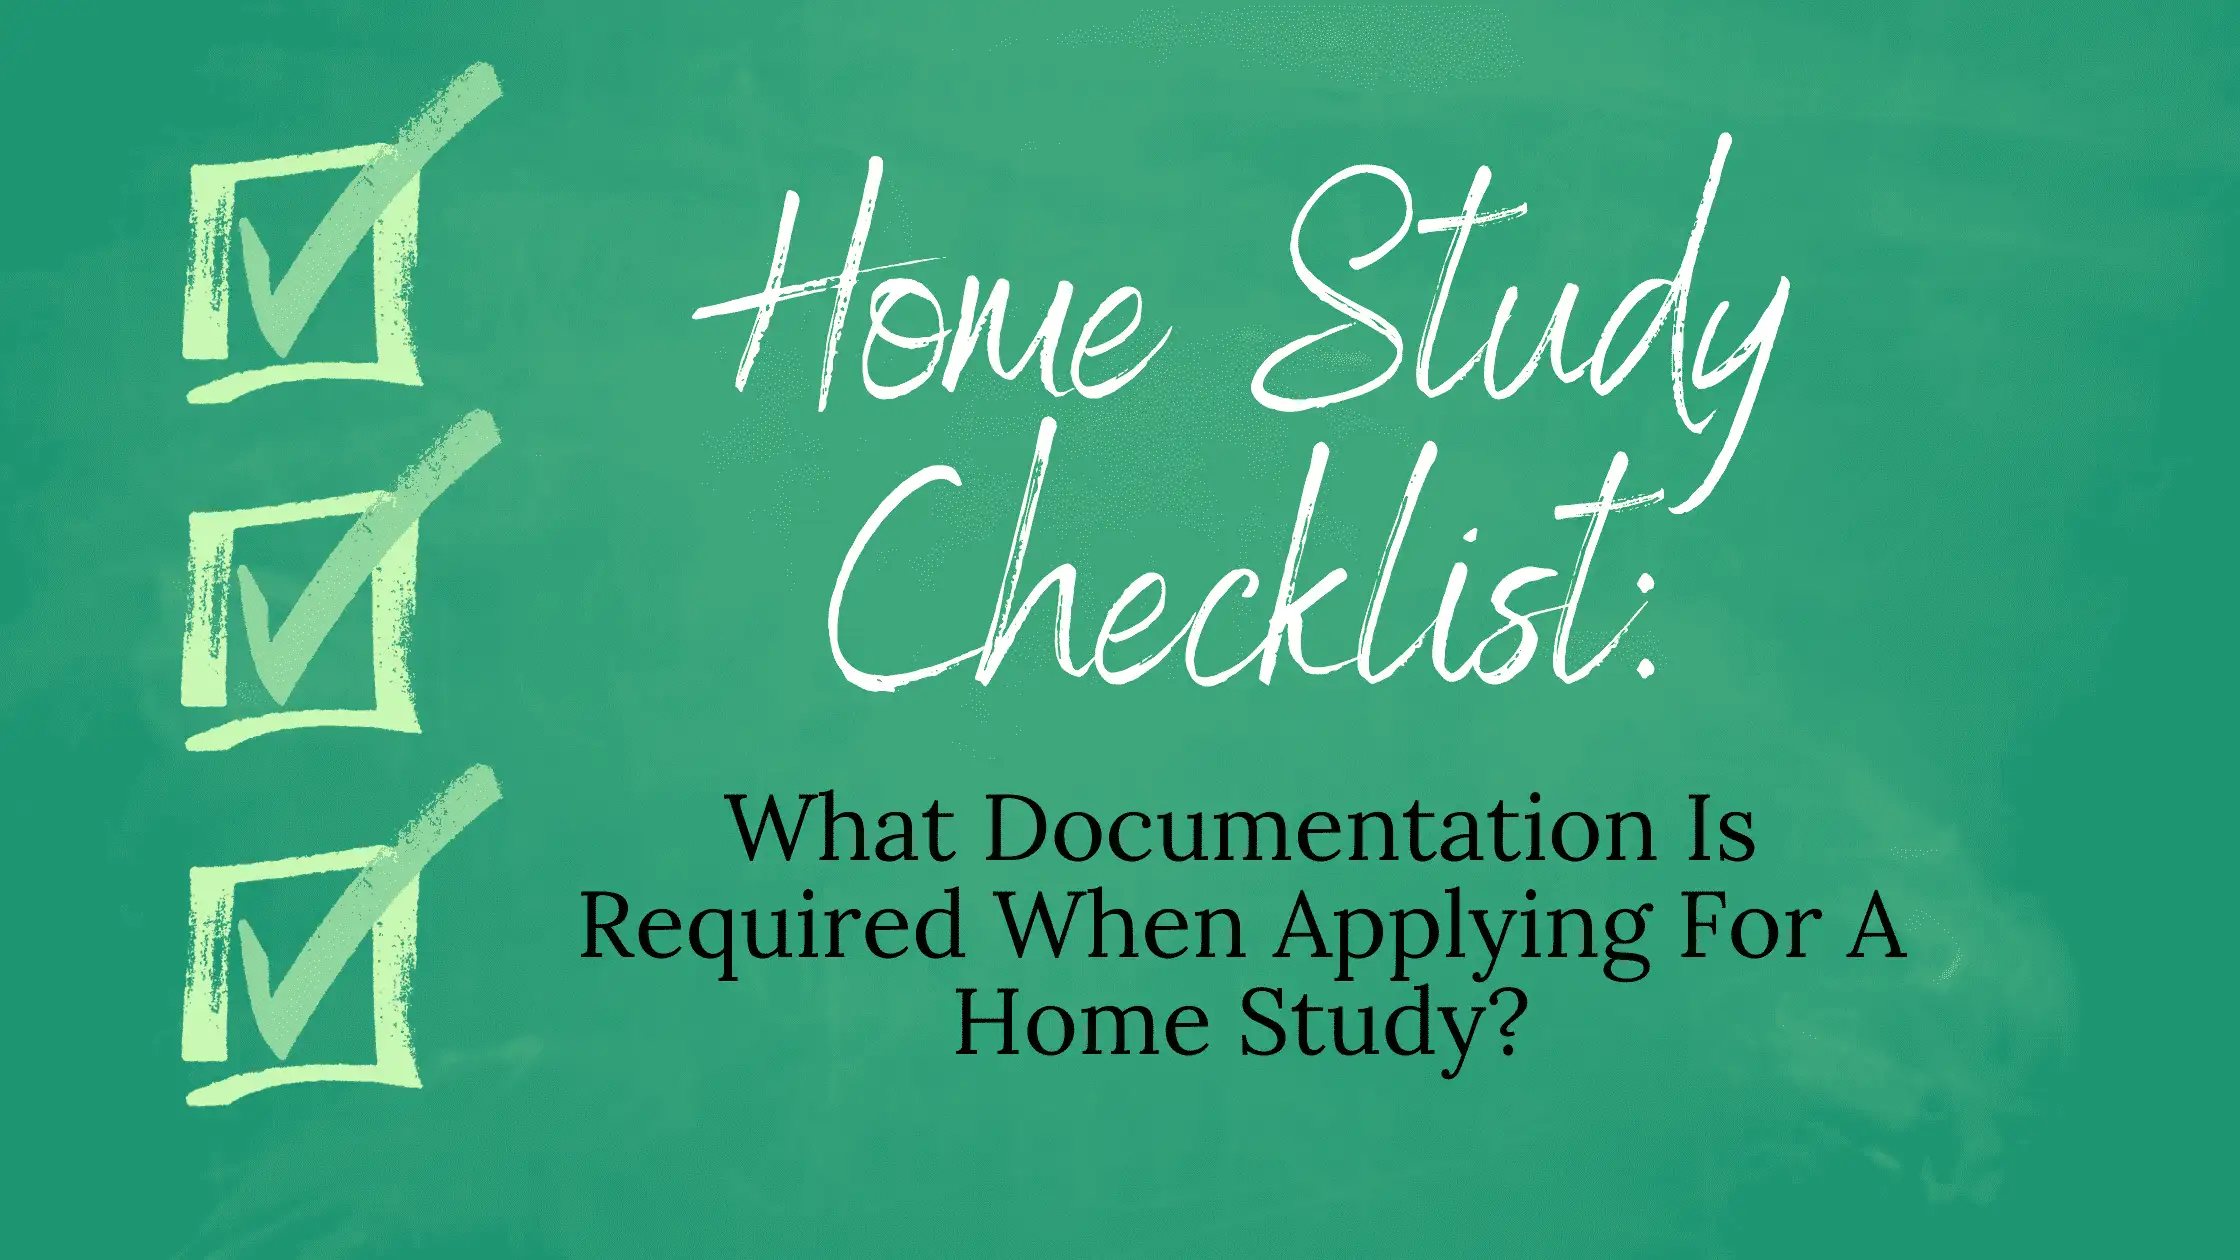 What is a home study